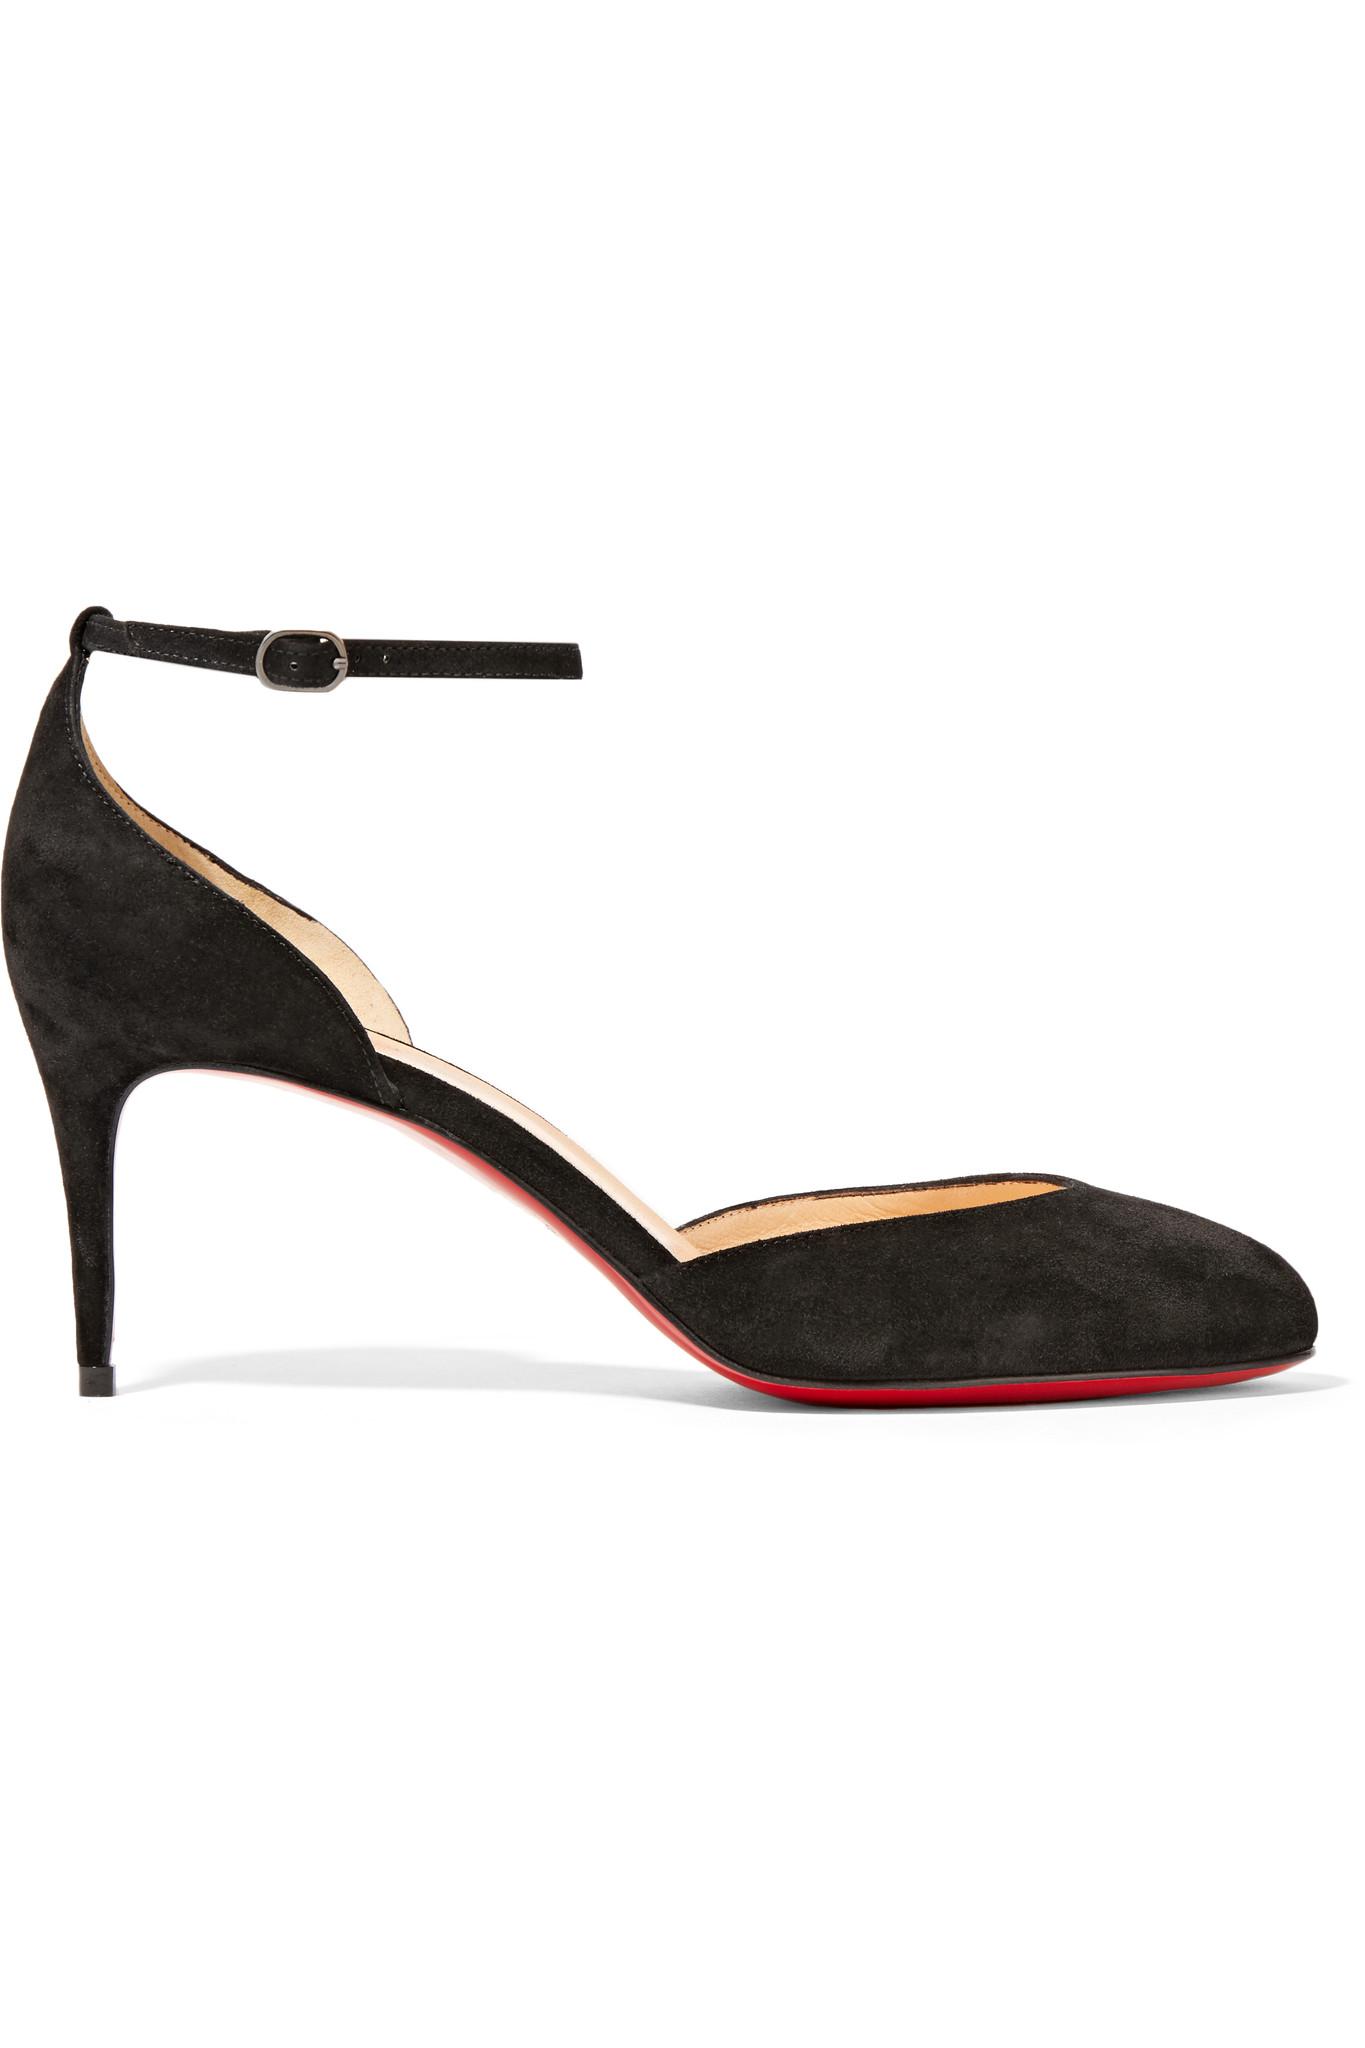 christian louboutin suede mary jane